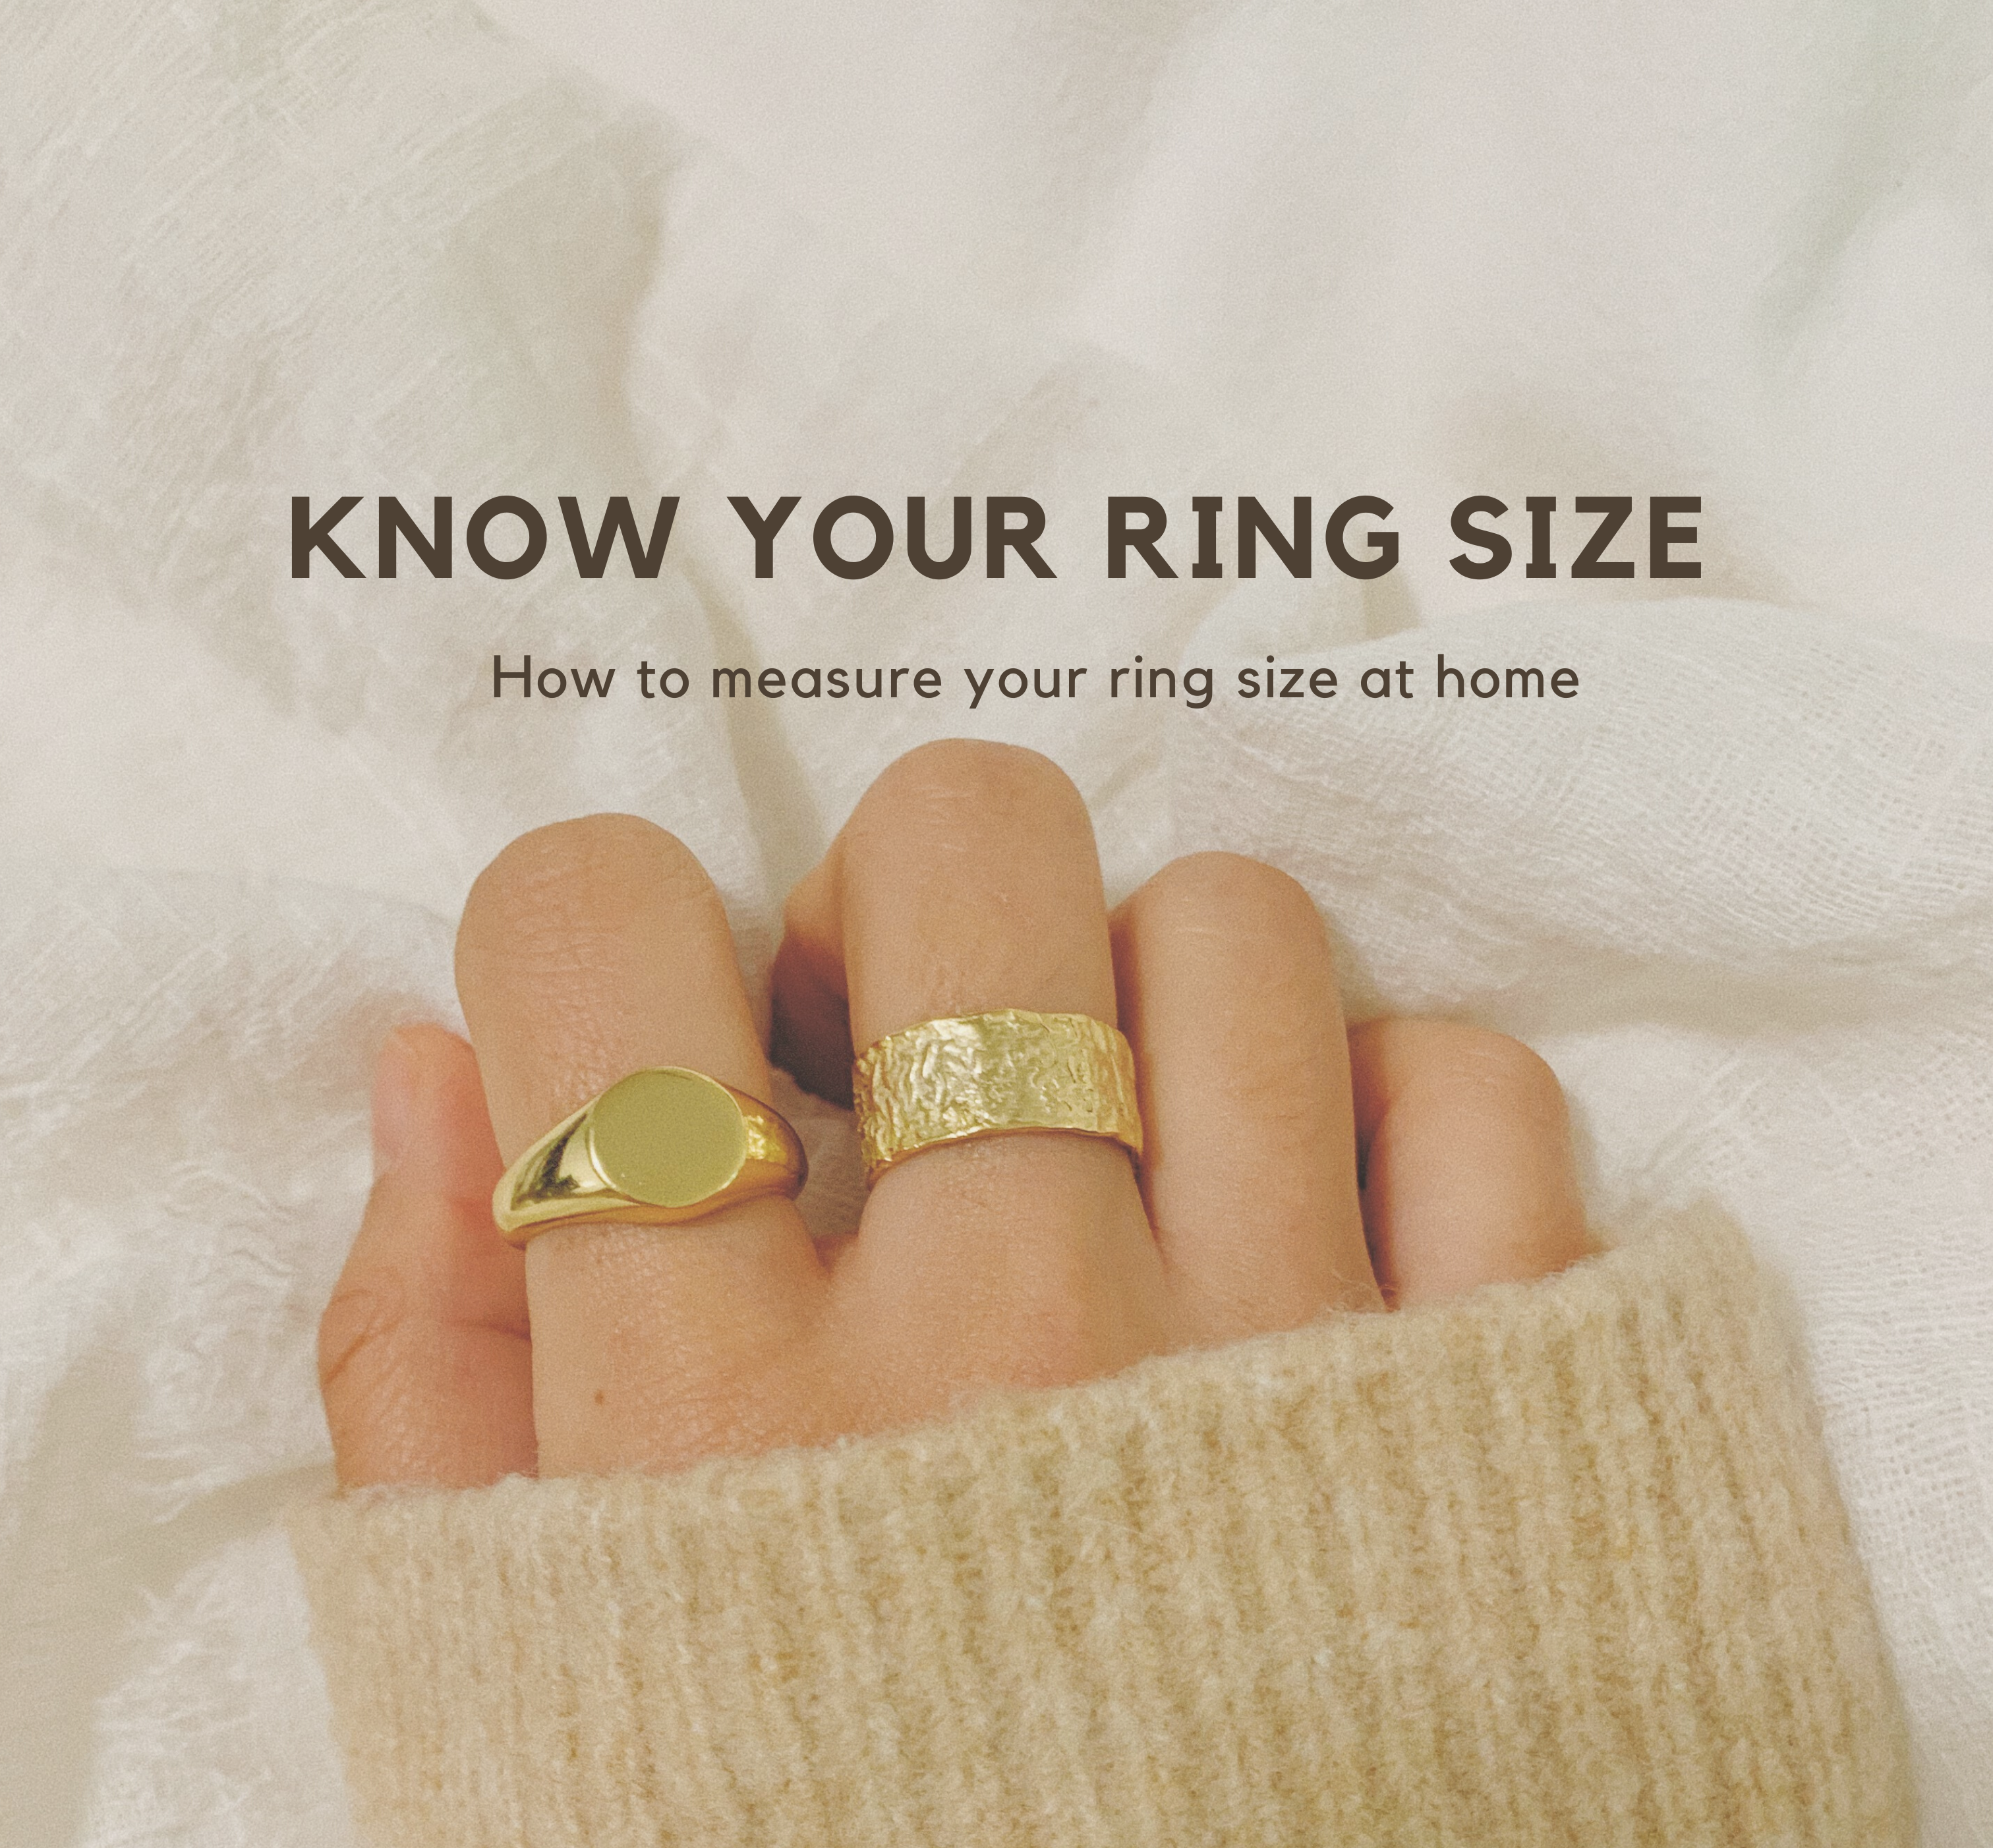 HOW TO MEASURE YOUR RING SIZE AT HOME